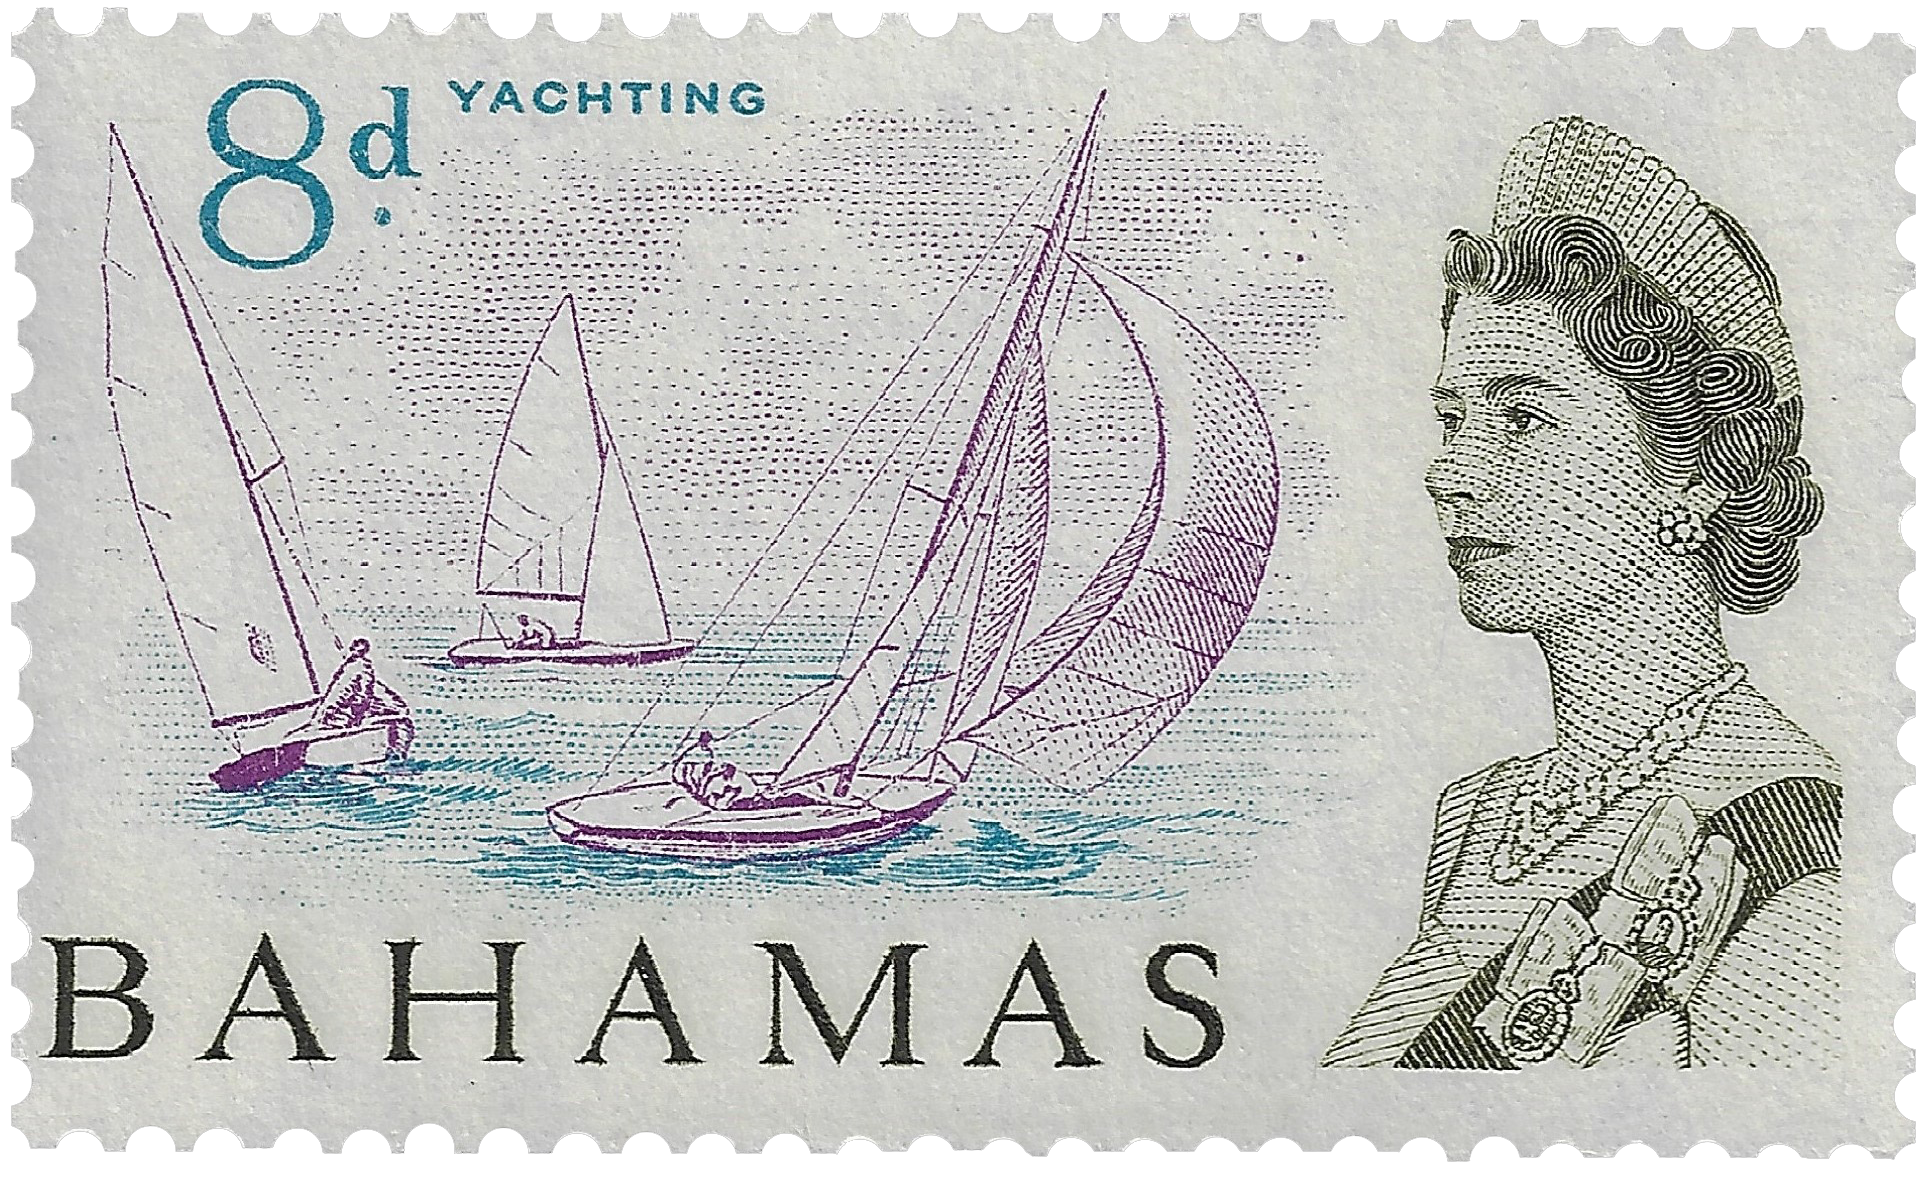 8d 1965, Yachting